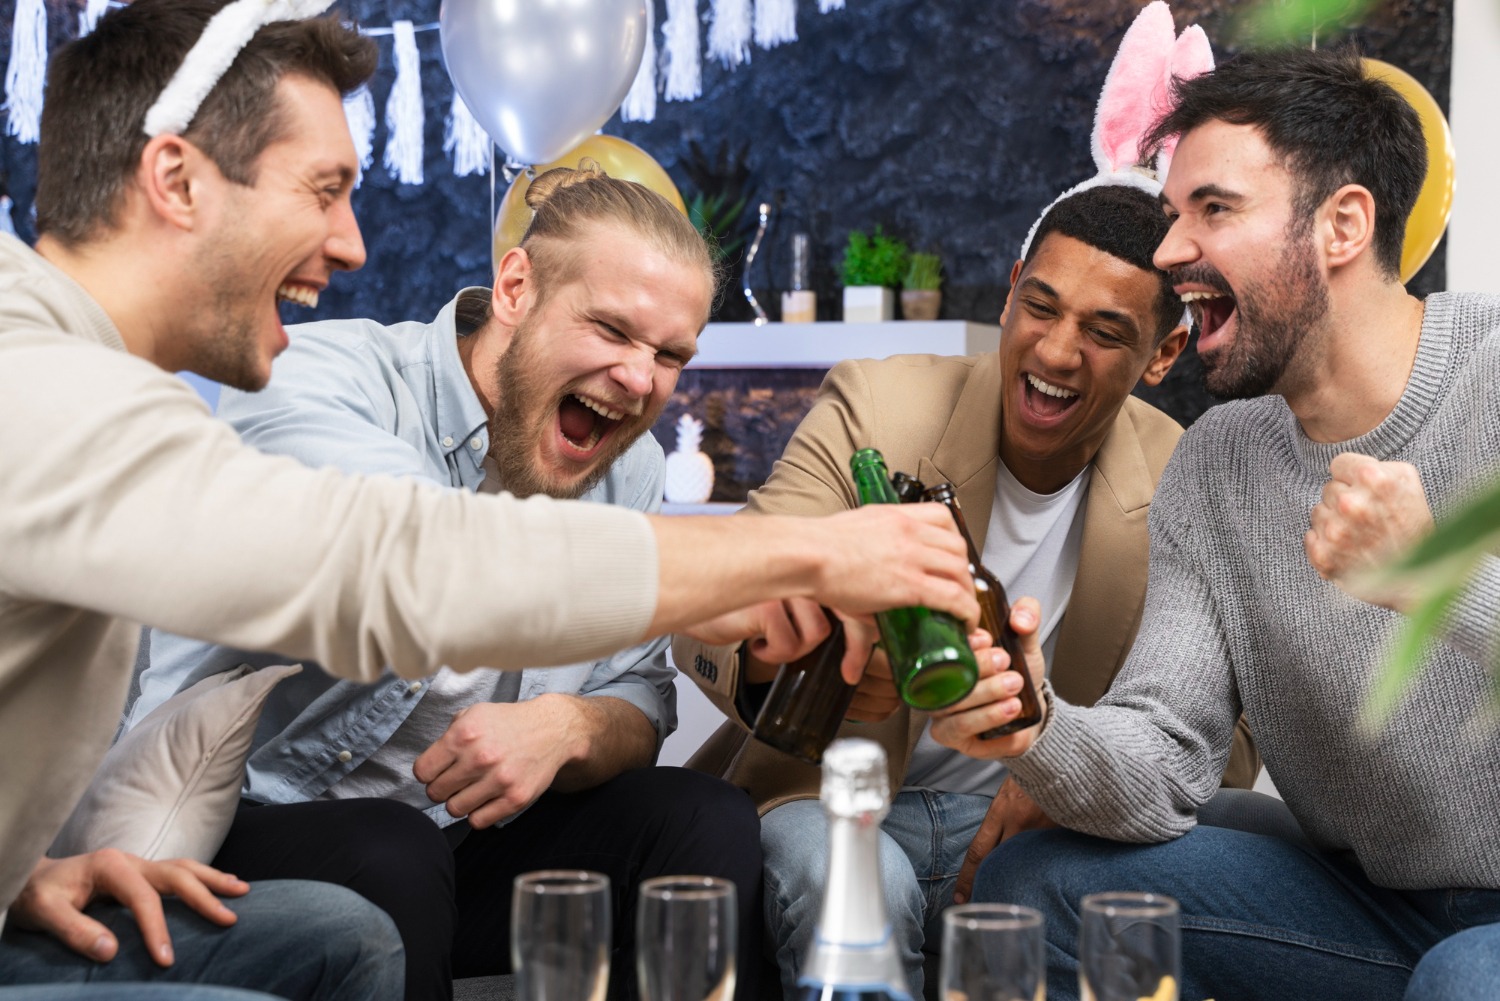 Exciting bachelor party service featuring a sleek limousine and party bus for seamless transportation. Professional chauffeur service ensures a stylish and stress-free celebration. Experience the ultimate in luxury with tailored packages for an unforgettable night out.